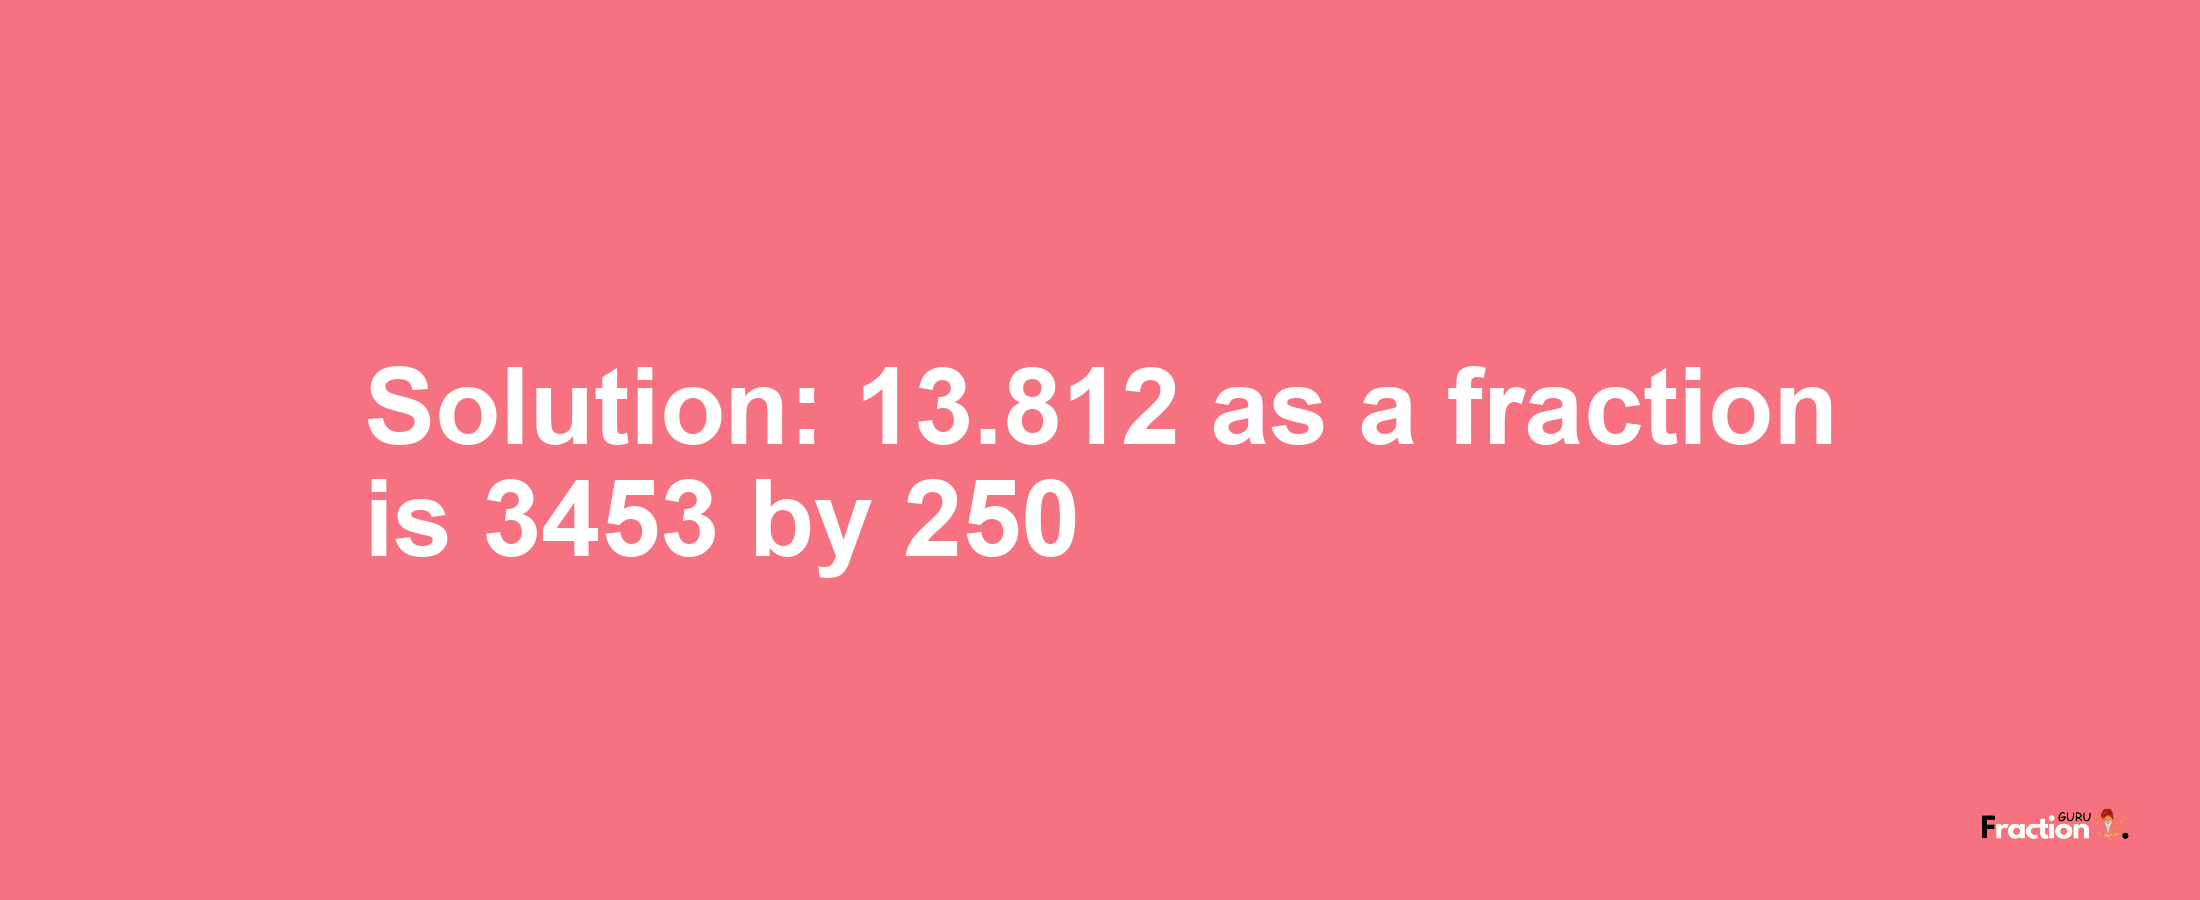 Solution:13.812 as a fraction is 3453/250